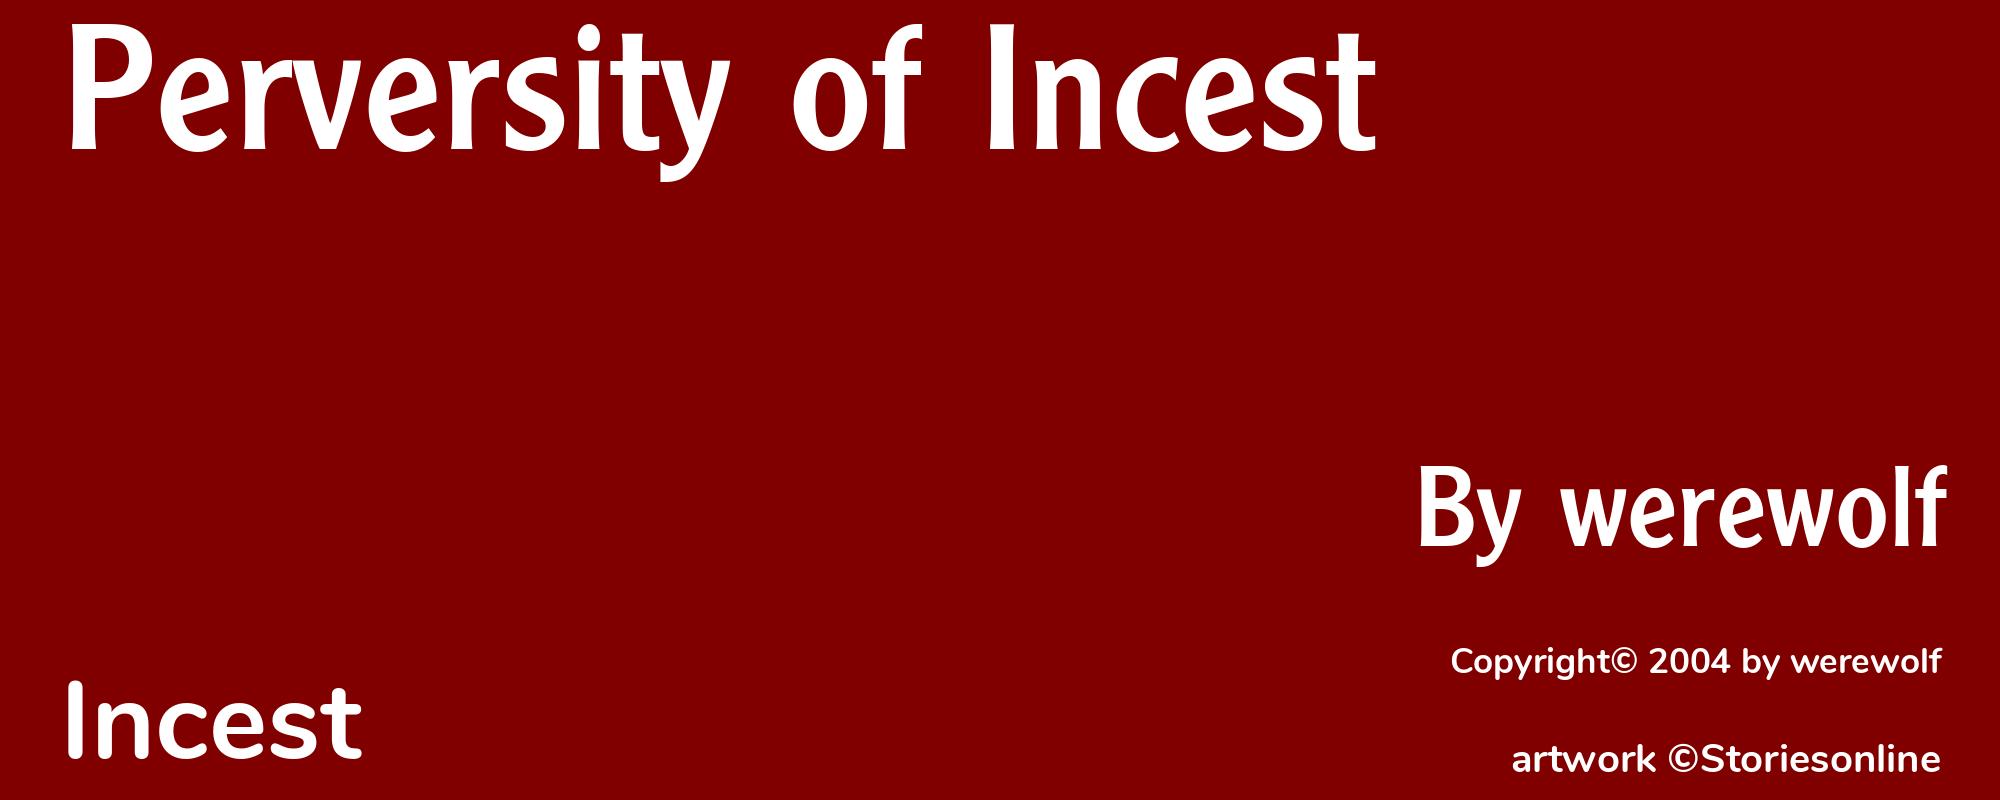 Perversity of Incest - Cover